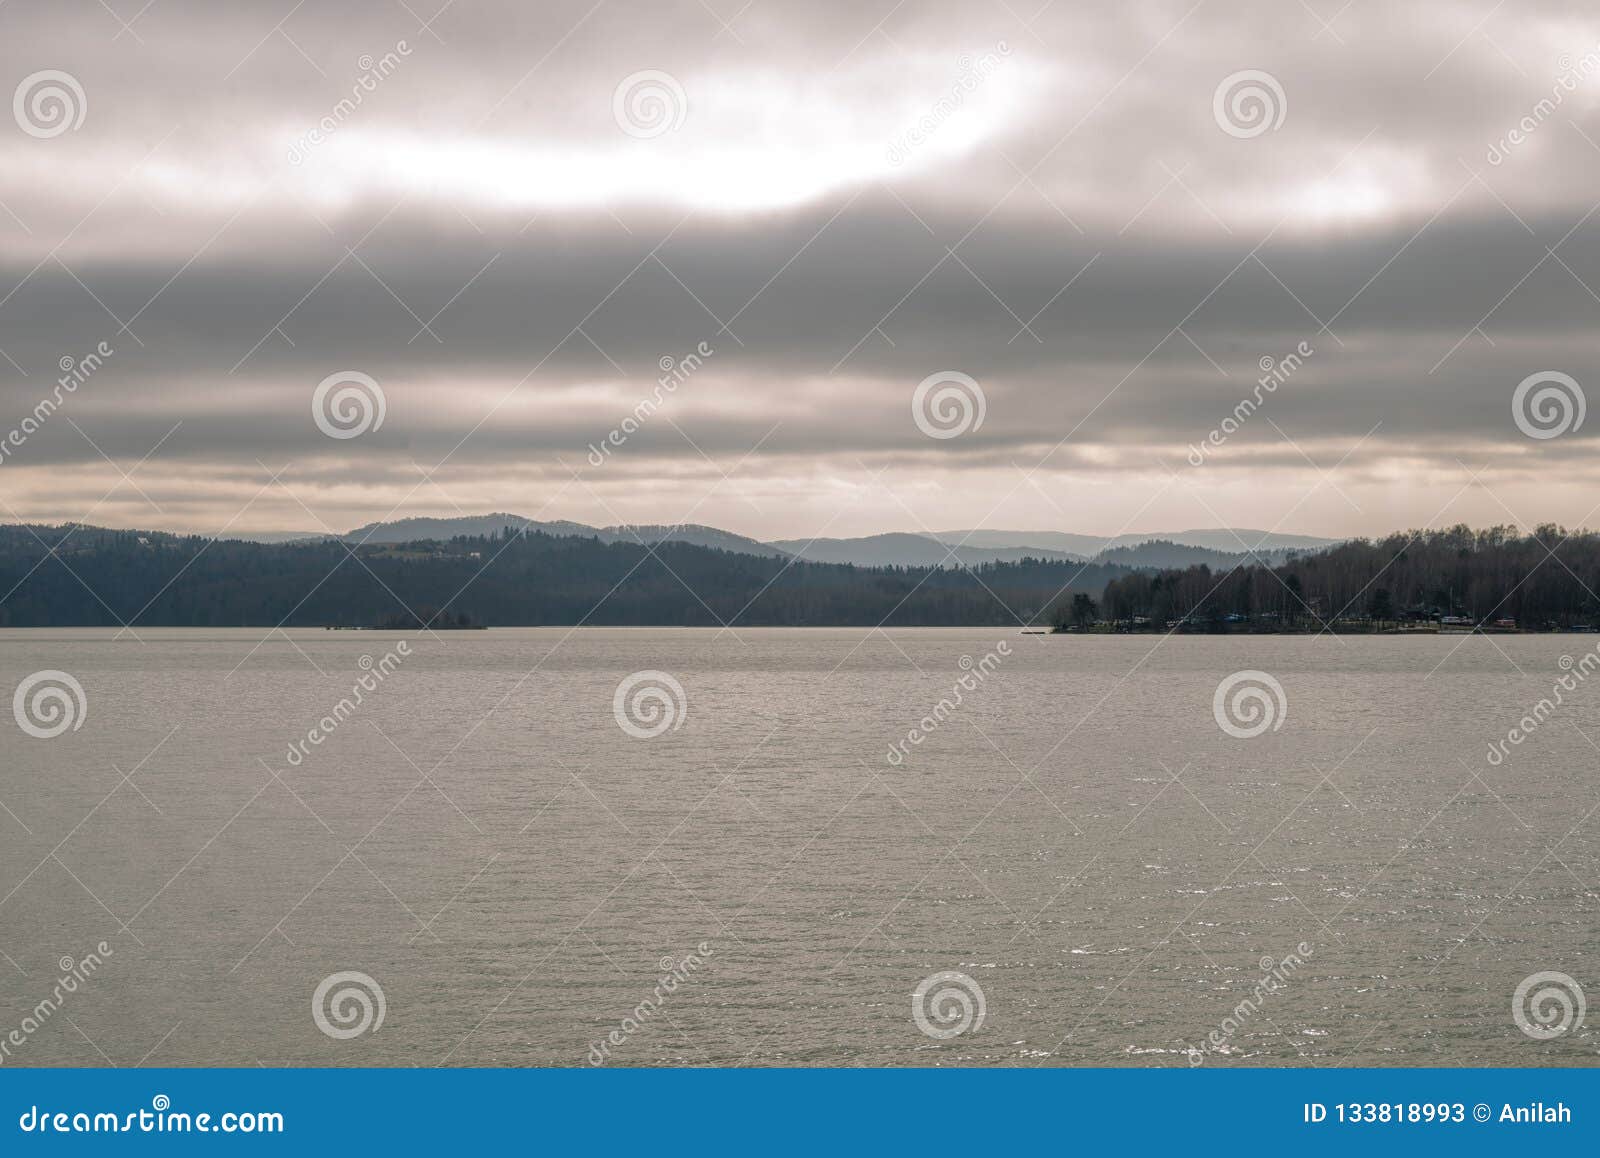 landscape from sounthern poland - famous solina